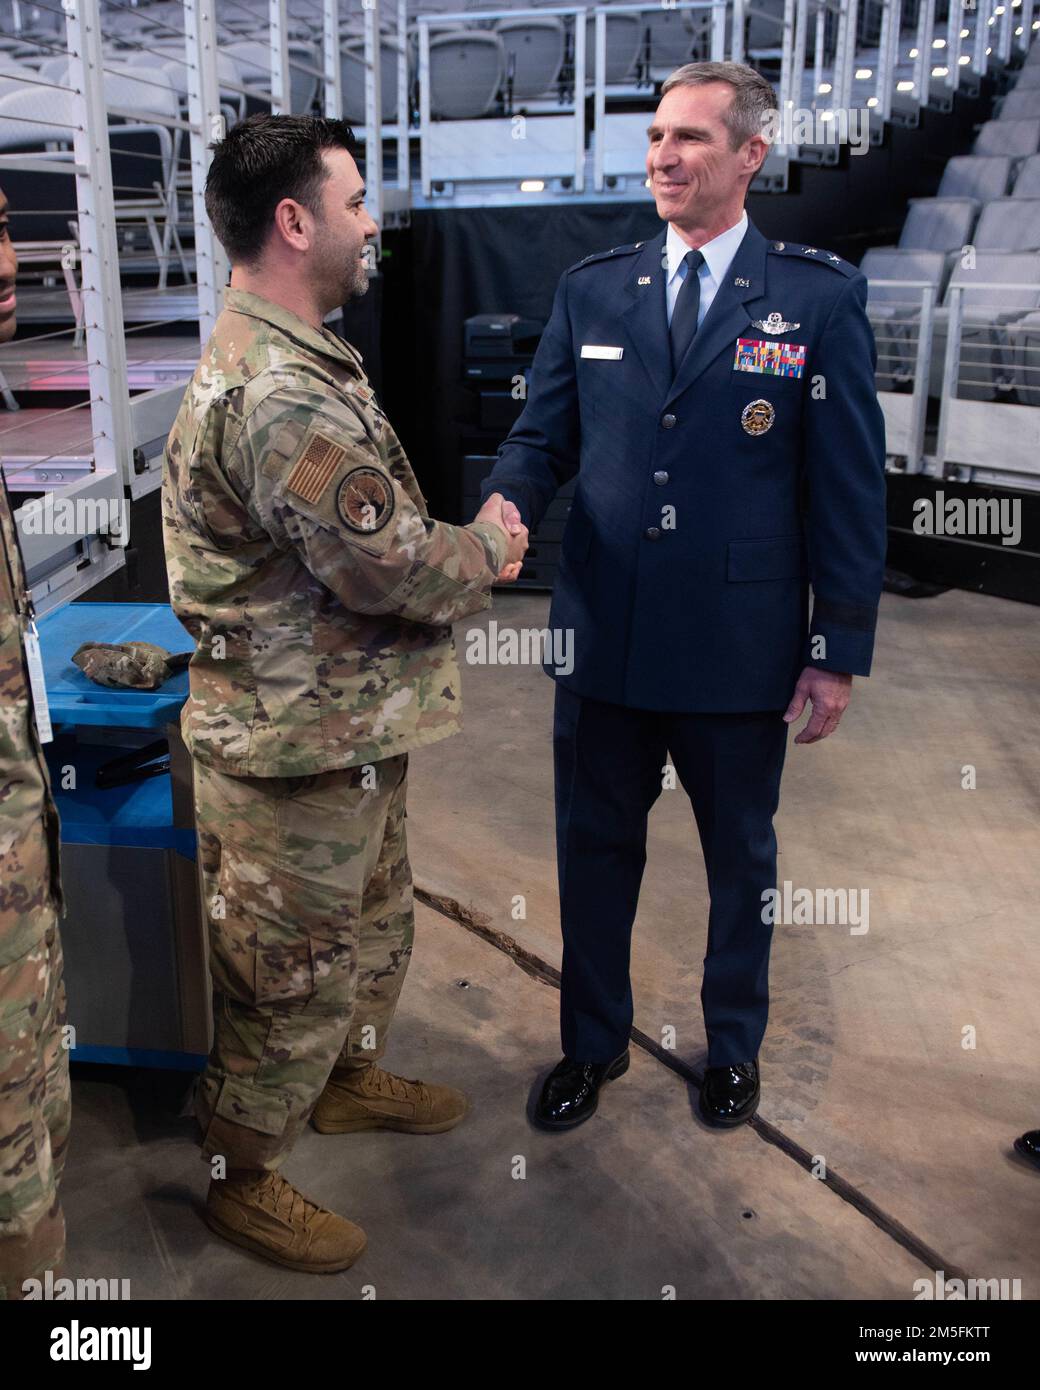 Before the American Athletic Conference Championship, Maj Gen Bryan Radliff recognized Master Sgt Aguilar for his exceptional performance as a member of the 352d Recruiting Squadron. Stock Photo